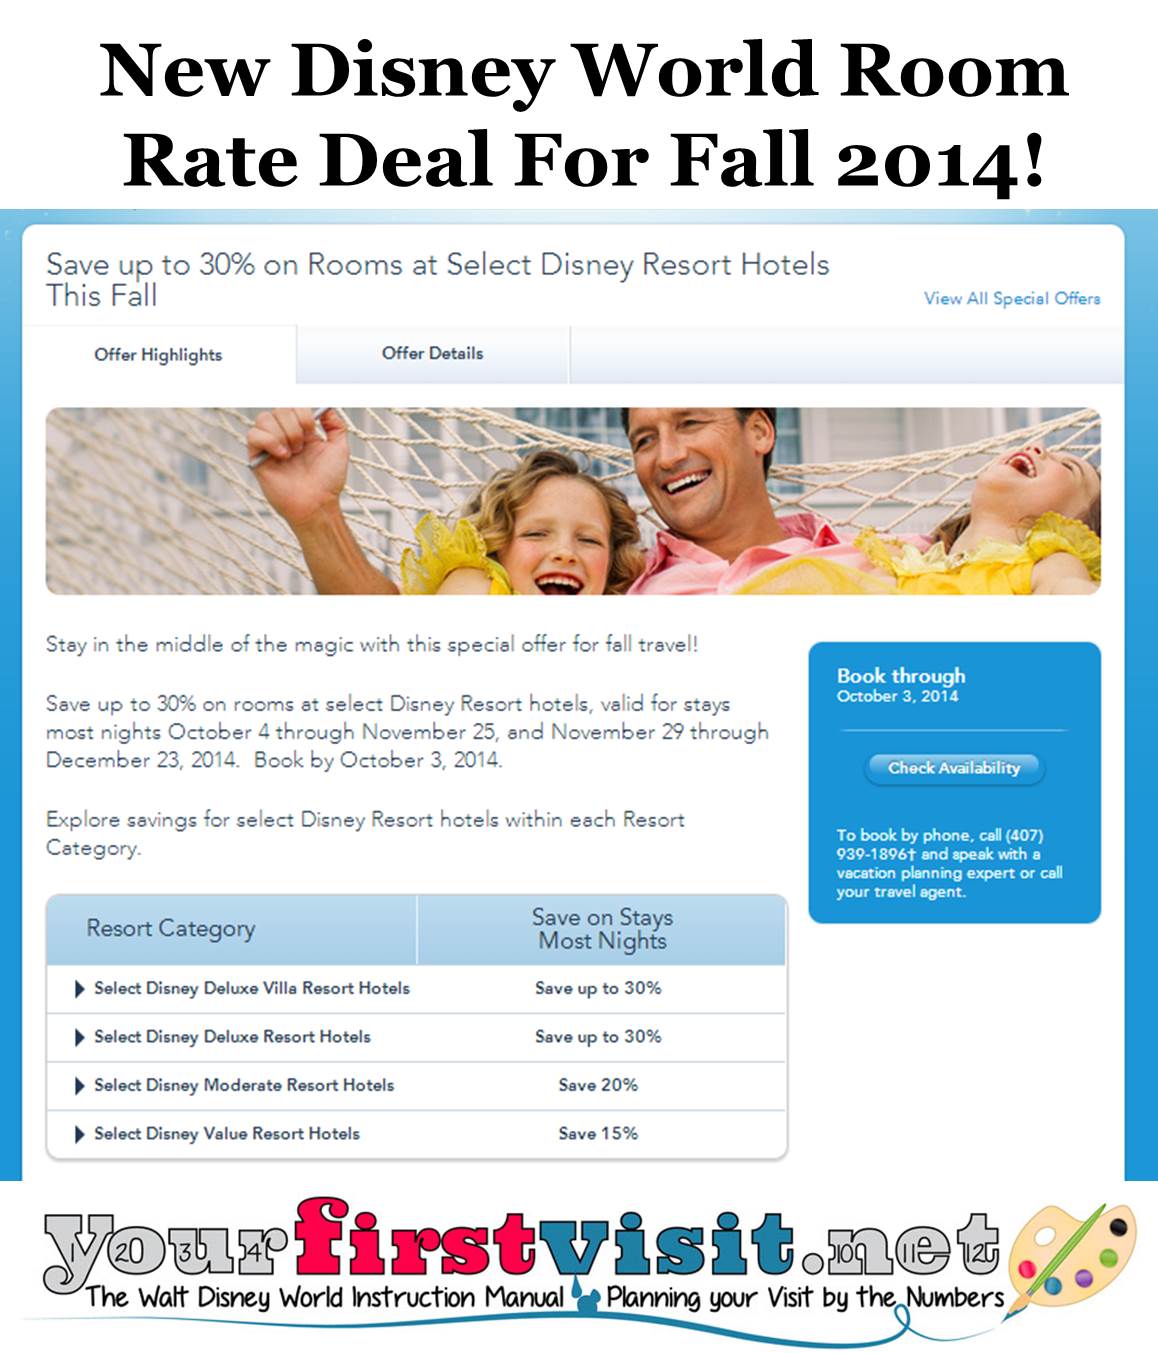 New Disney World Room Rate Deal for Fall 2014 from yourfirstvisit.net